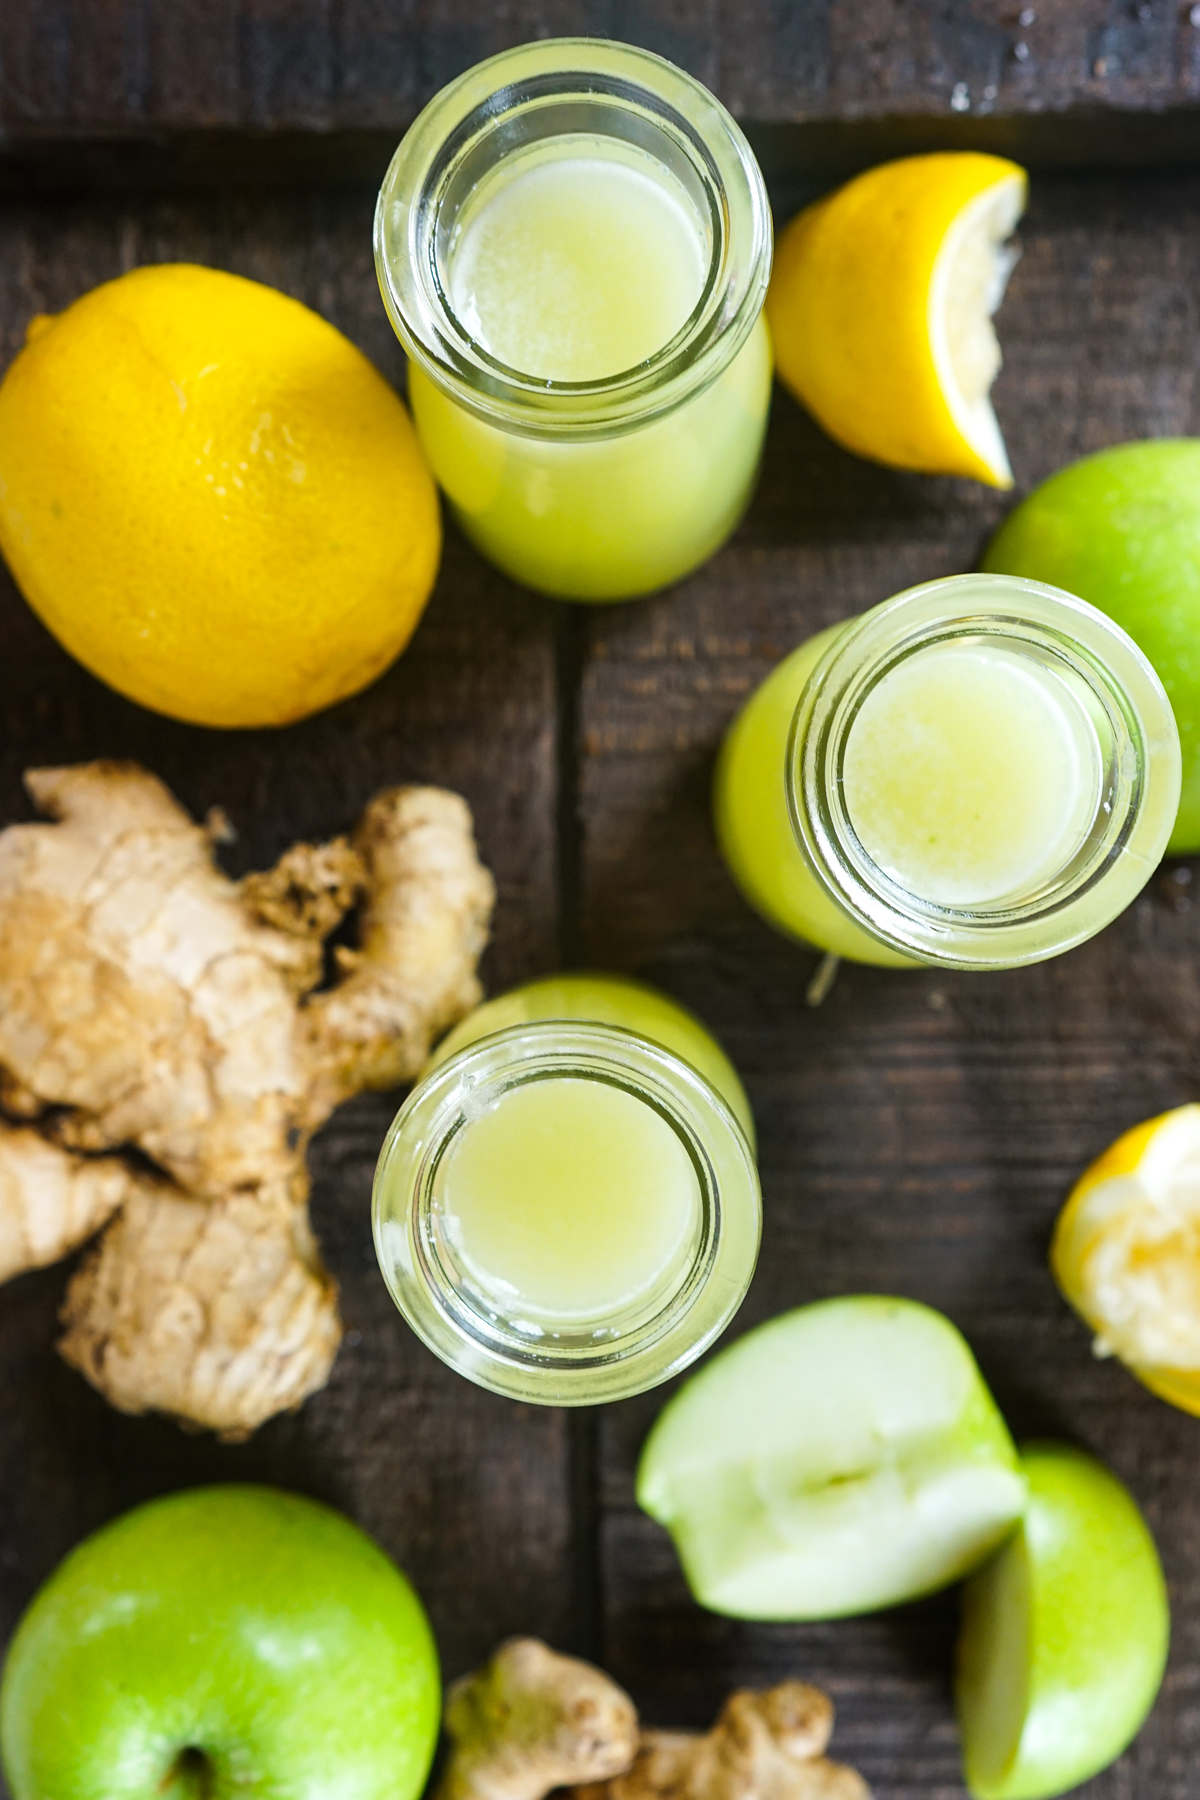 Homemade Ginger shots with ingredients used